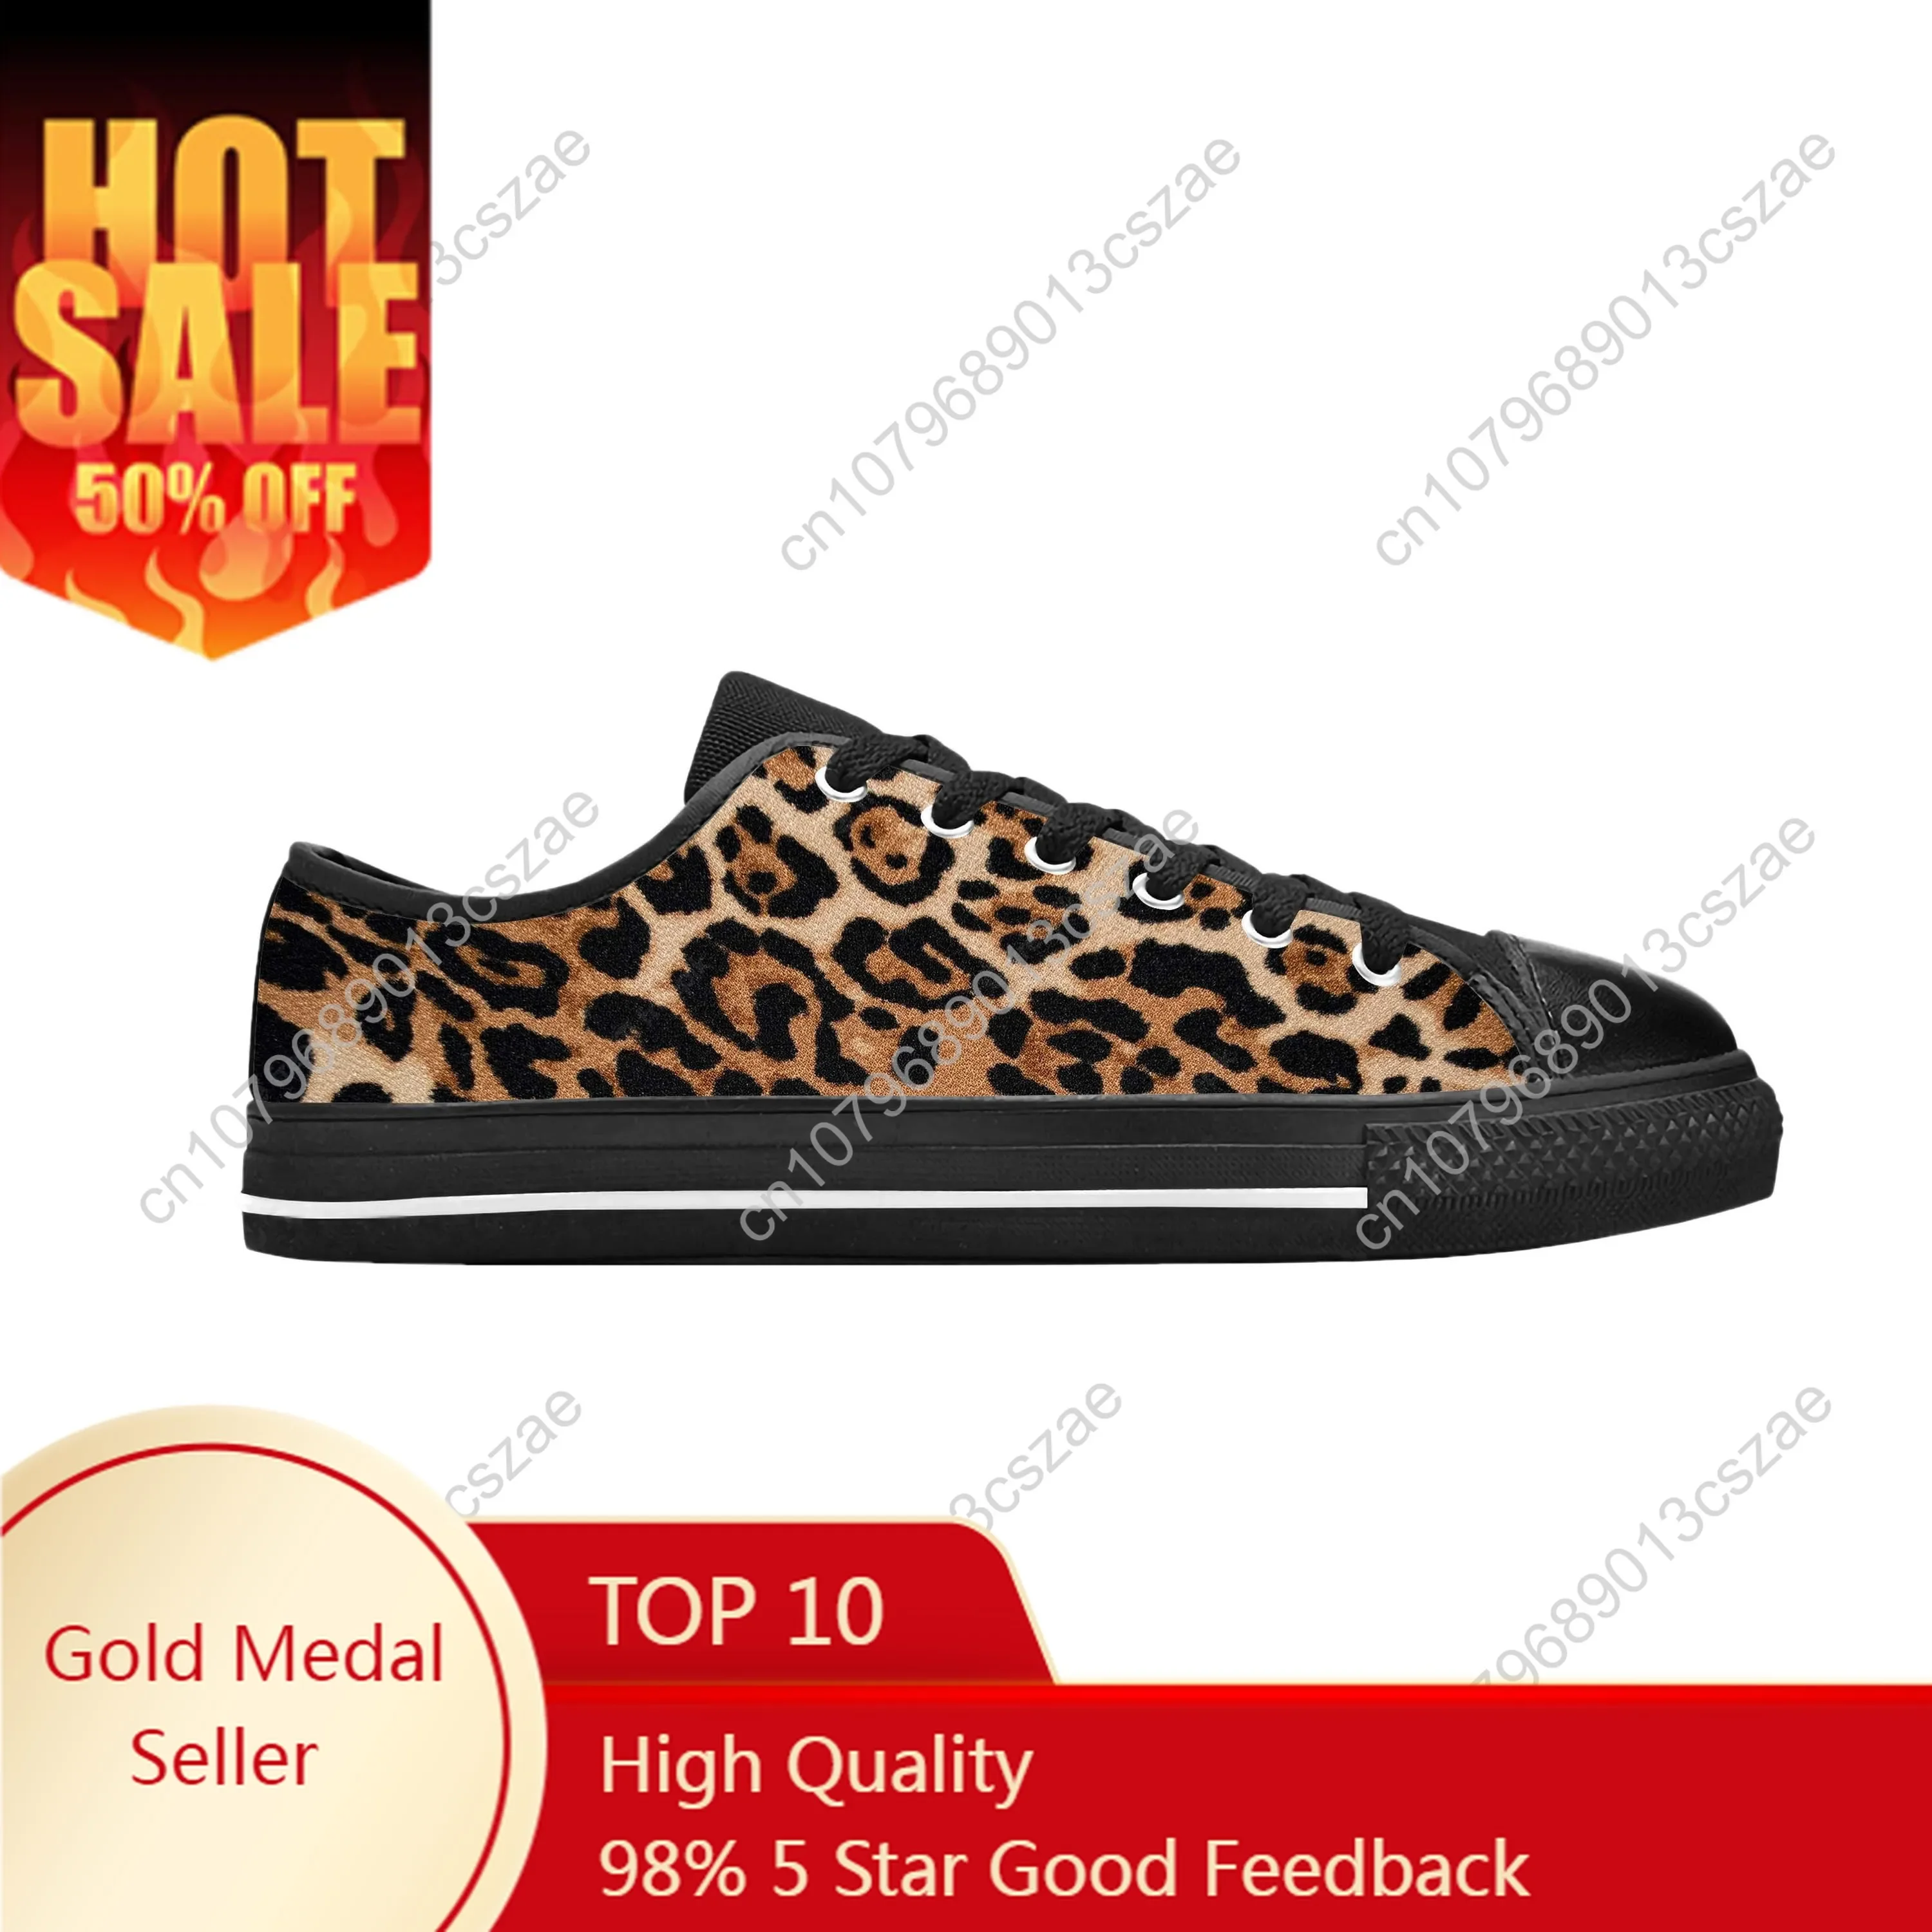 

Animal Panther Leopard Print Skin Pattern Fashion Casual Cloth Shoes Low Top Comfortable Breathable 3D Print Men Women Sneakers